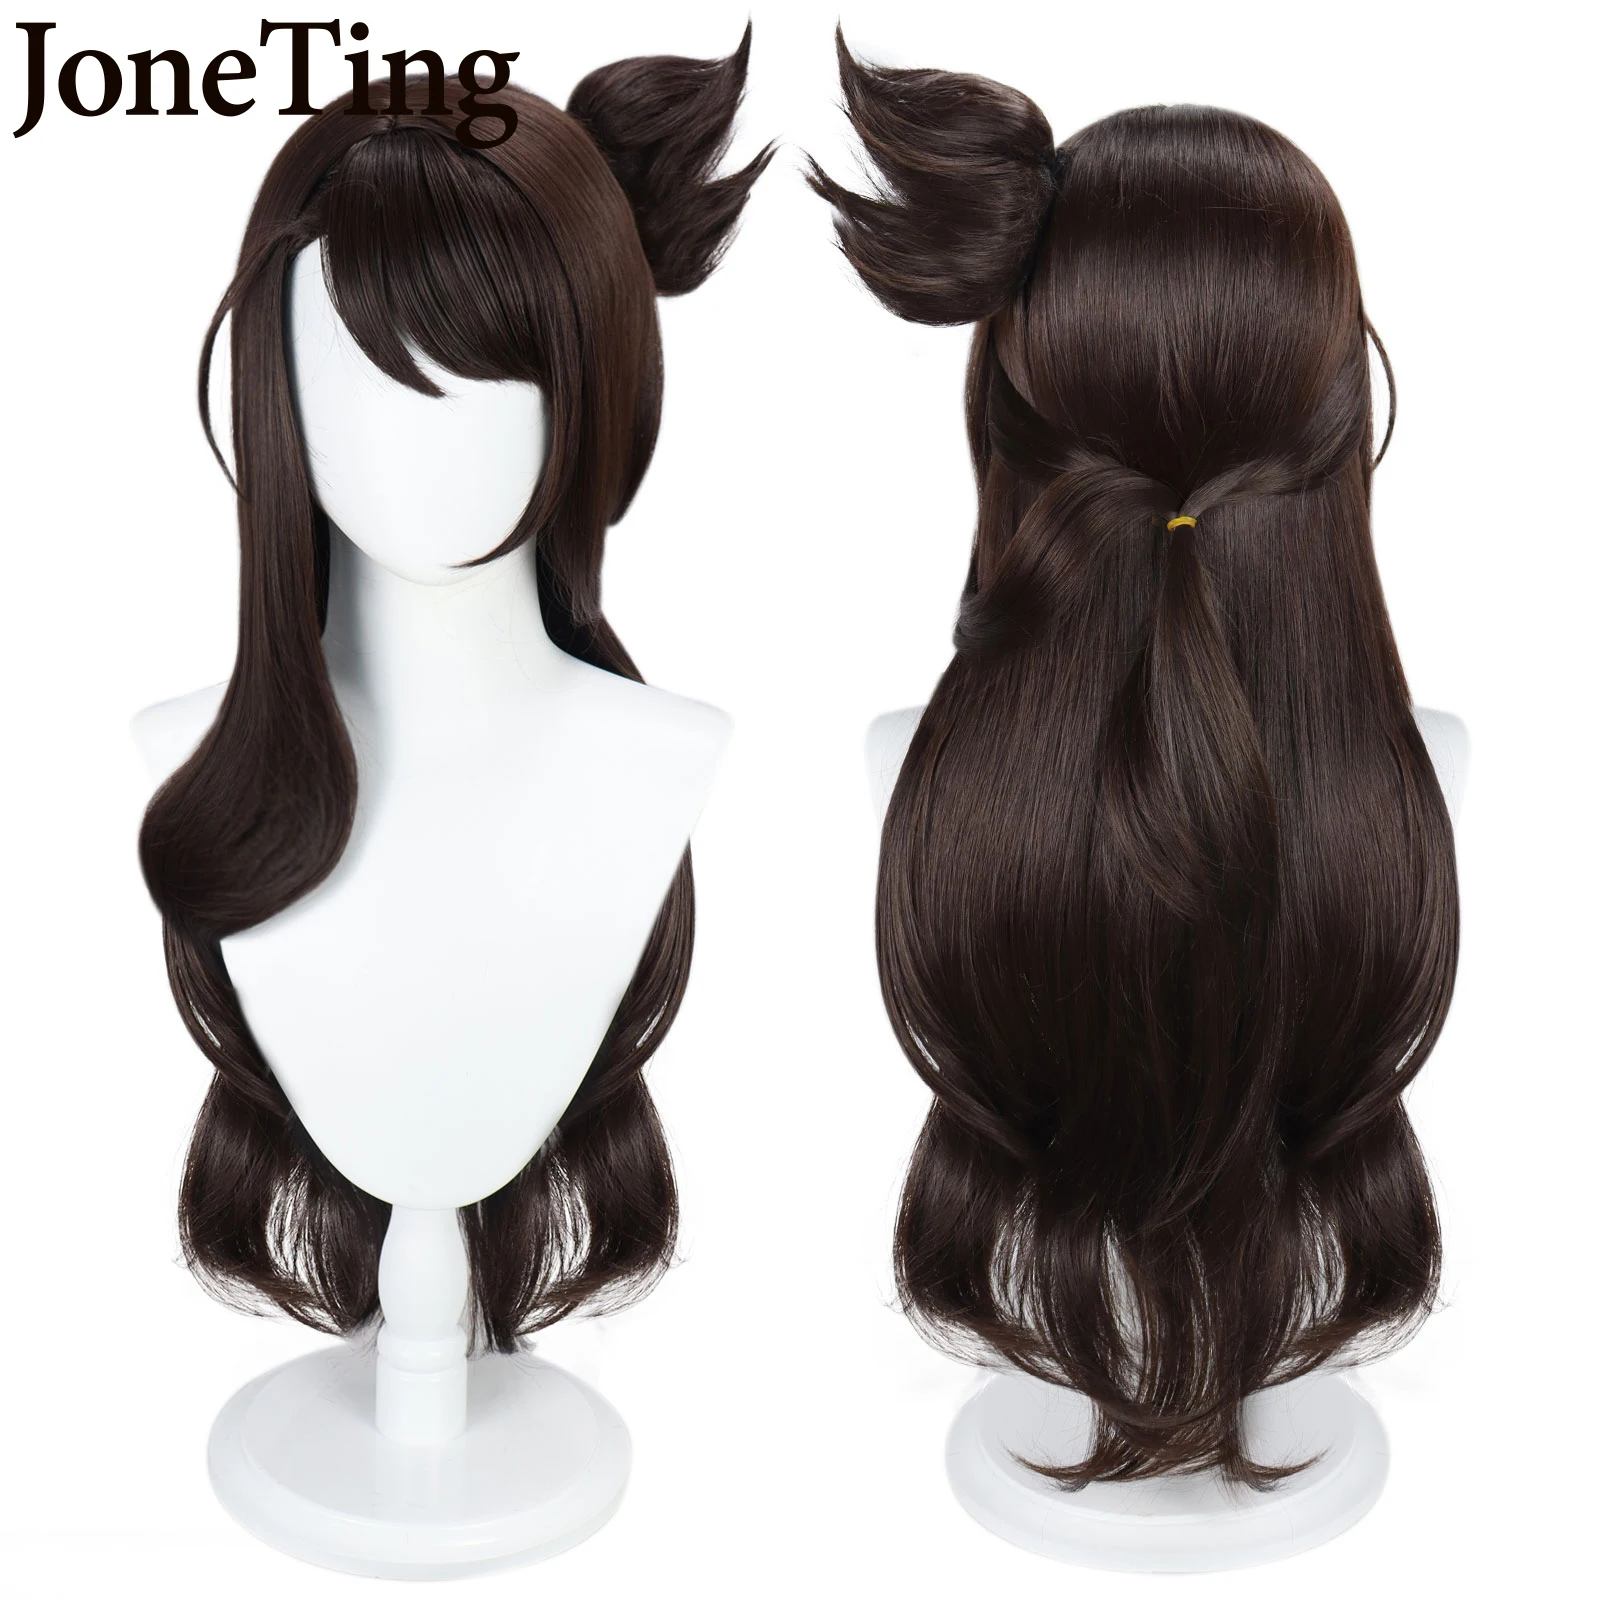 JT Synthetic Beidou Cosplay Wigs Game Genshin Impact Wig Removable Bun Brown Long Straight Wig with Bangs Halloween Party ranyu genshin impact klee wig synthetic straight short blonde game cosplay hair heat resistant wig for party